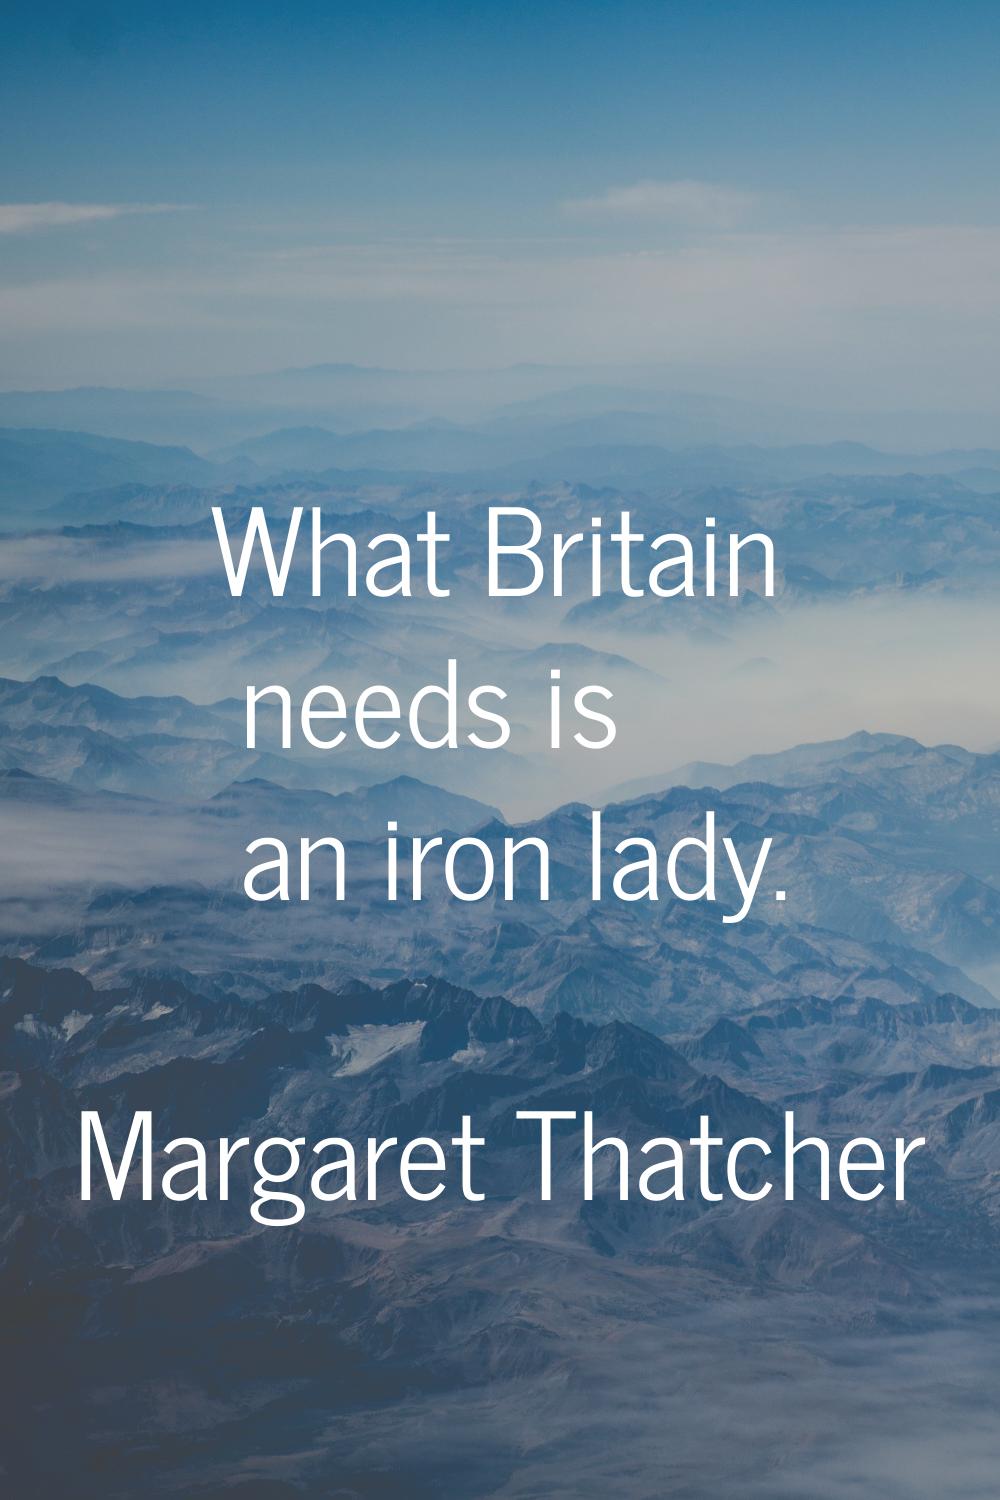 What Britain needs is an iron lady.